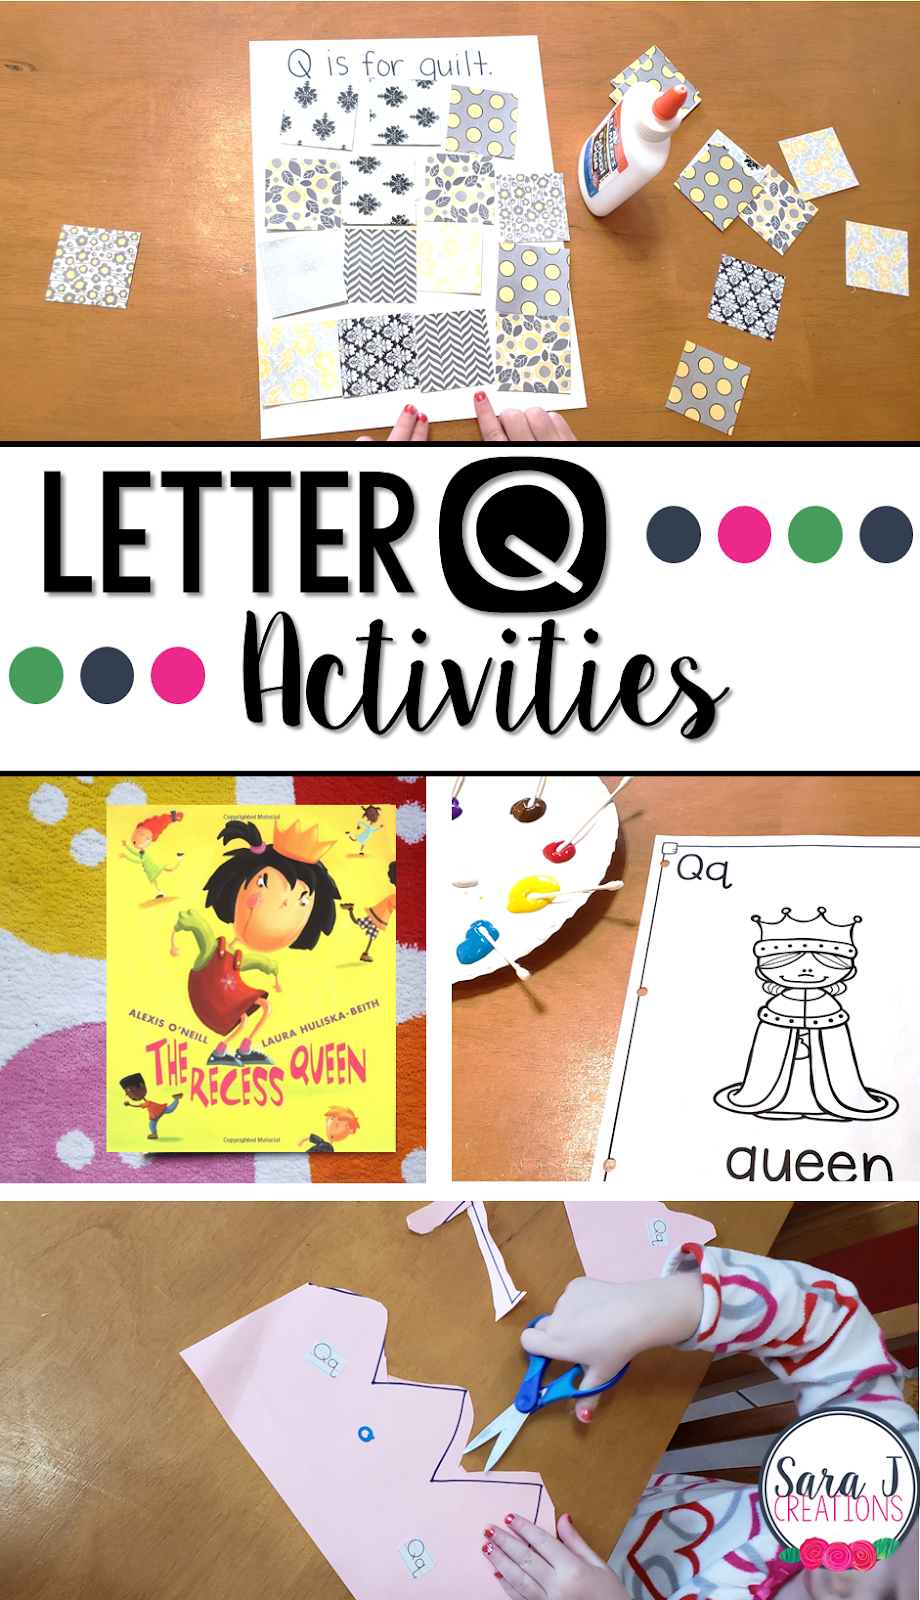 Letter Q Activities that would be perfect for preschool or kindergarten. Art, fine motor, literacy, and more all rolled into Letter Q fun.